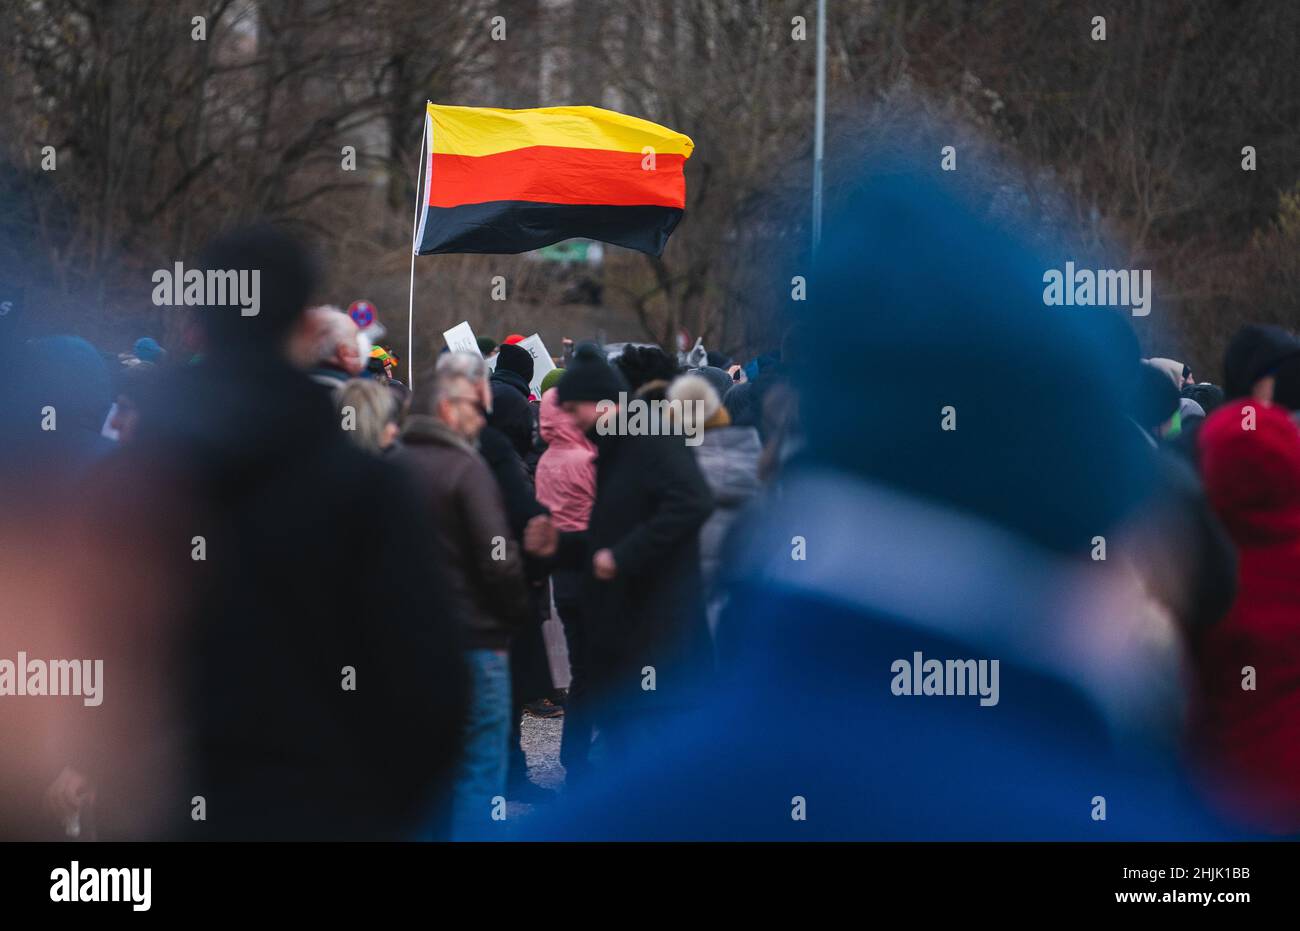 Nuremberg, Germany. 30th Jan, 2022. During the gathering under the slogan 'Denkpflicht statt Impfpflicht' at the Volksfestplatz, someone holds an upside-down German flag in his hands. According to police, at peak times 3500-4000 people took part in the protest action against state Corona measures. Credit: ---/dpa/Alamy Live News Stock Photo